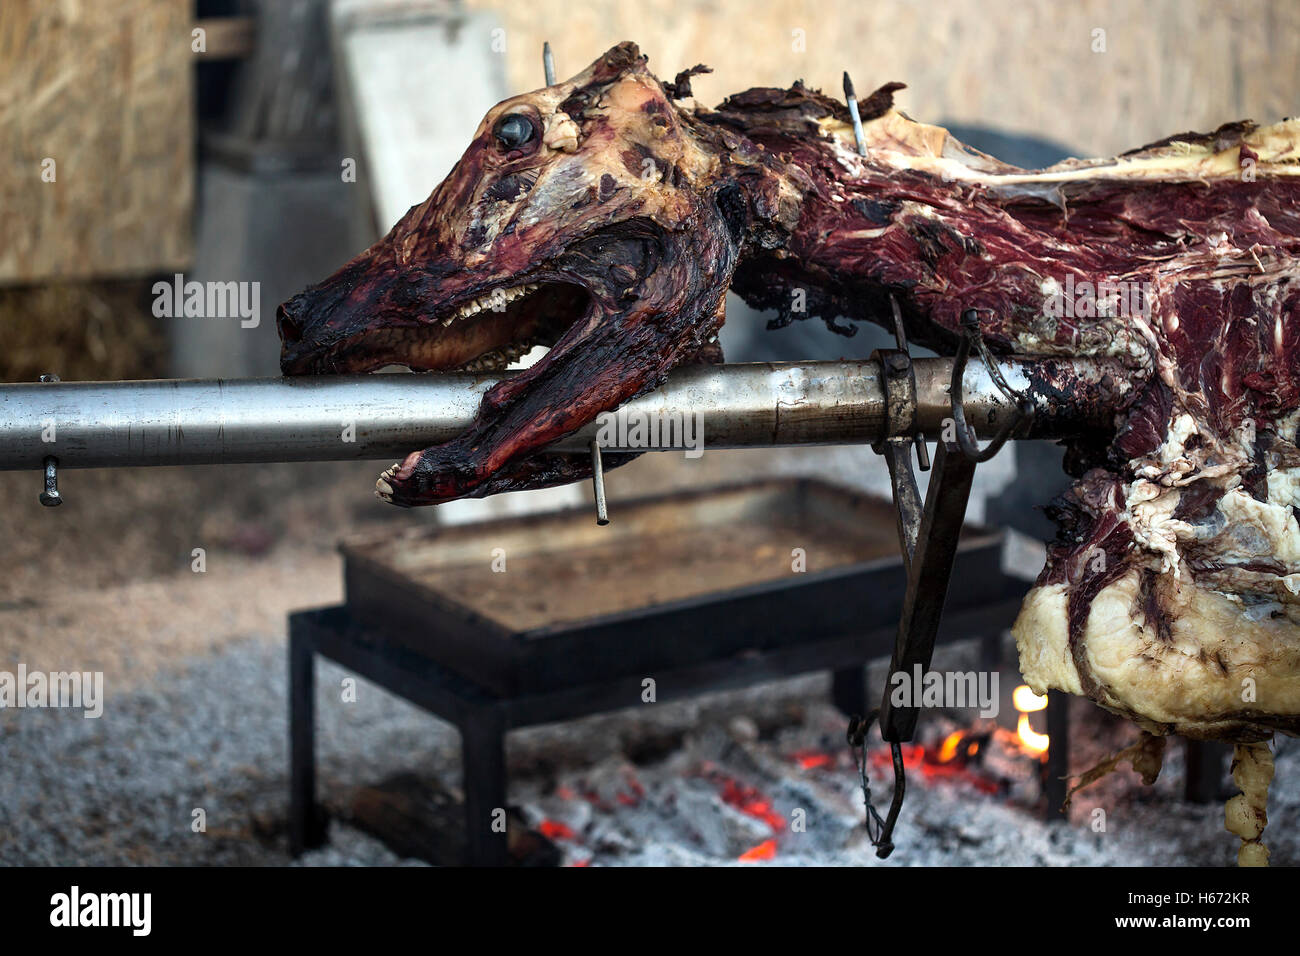 Taurus bull being cooked on a open fire. Stock Photo